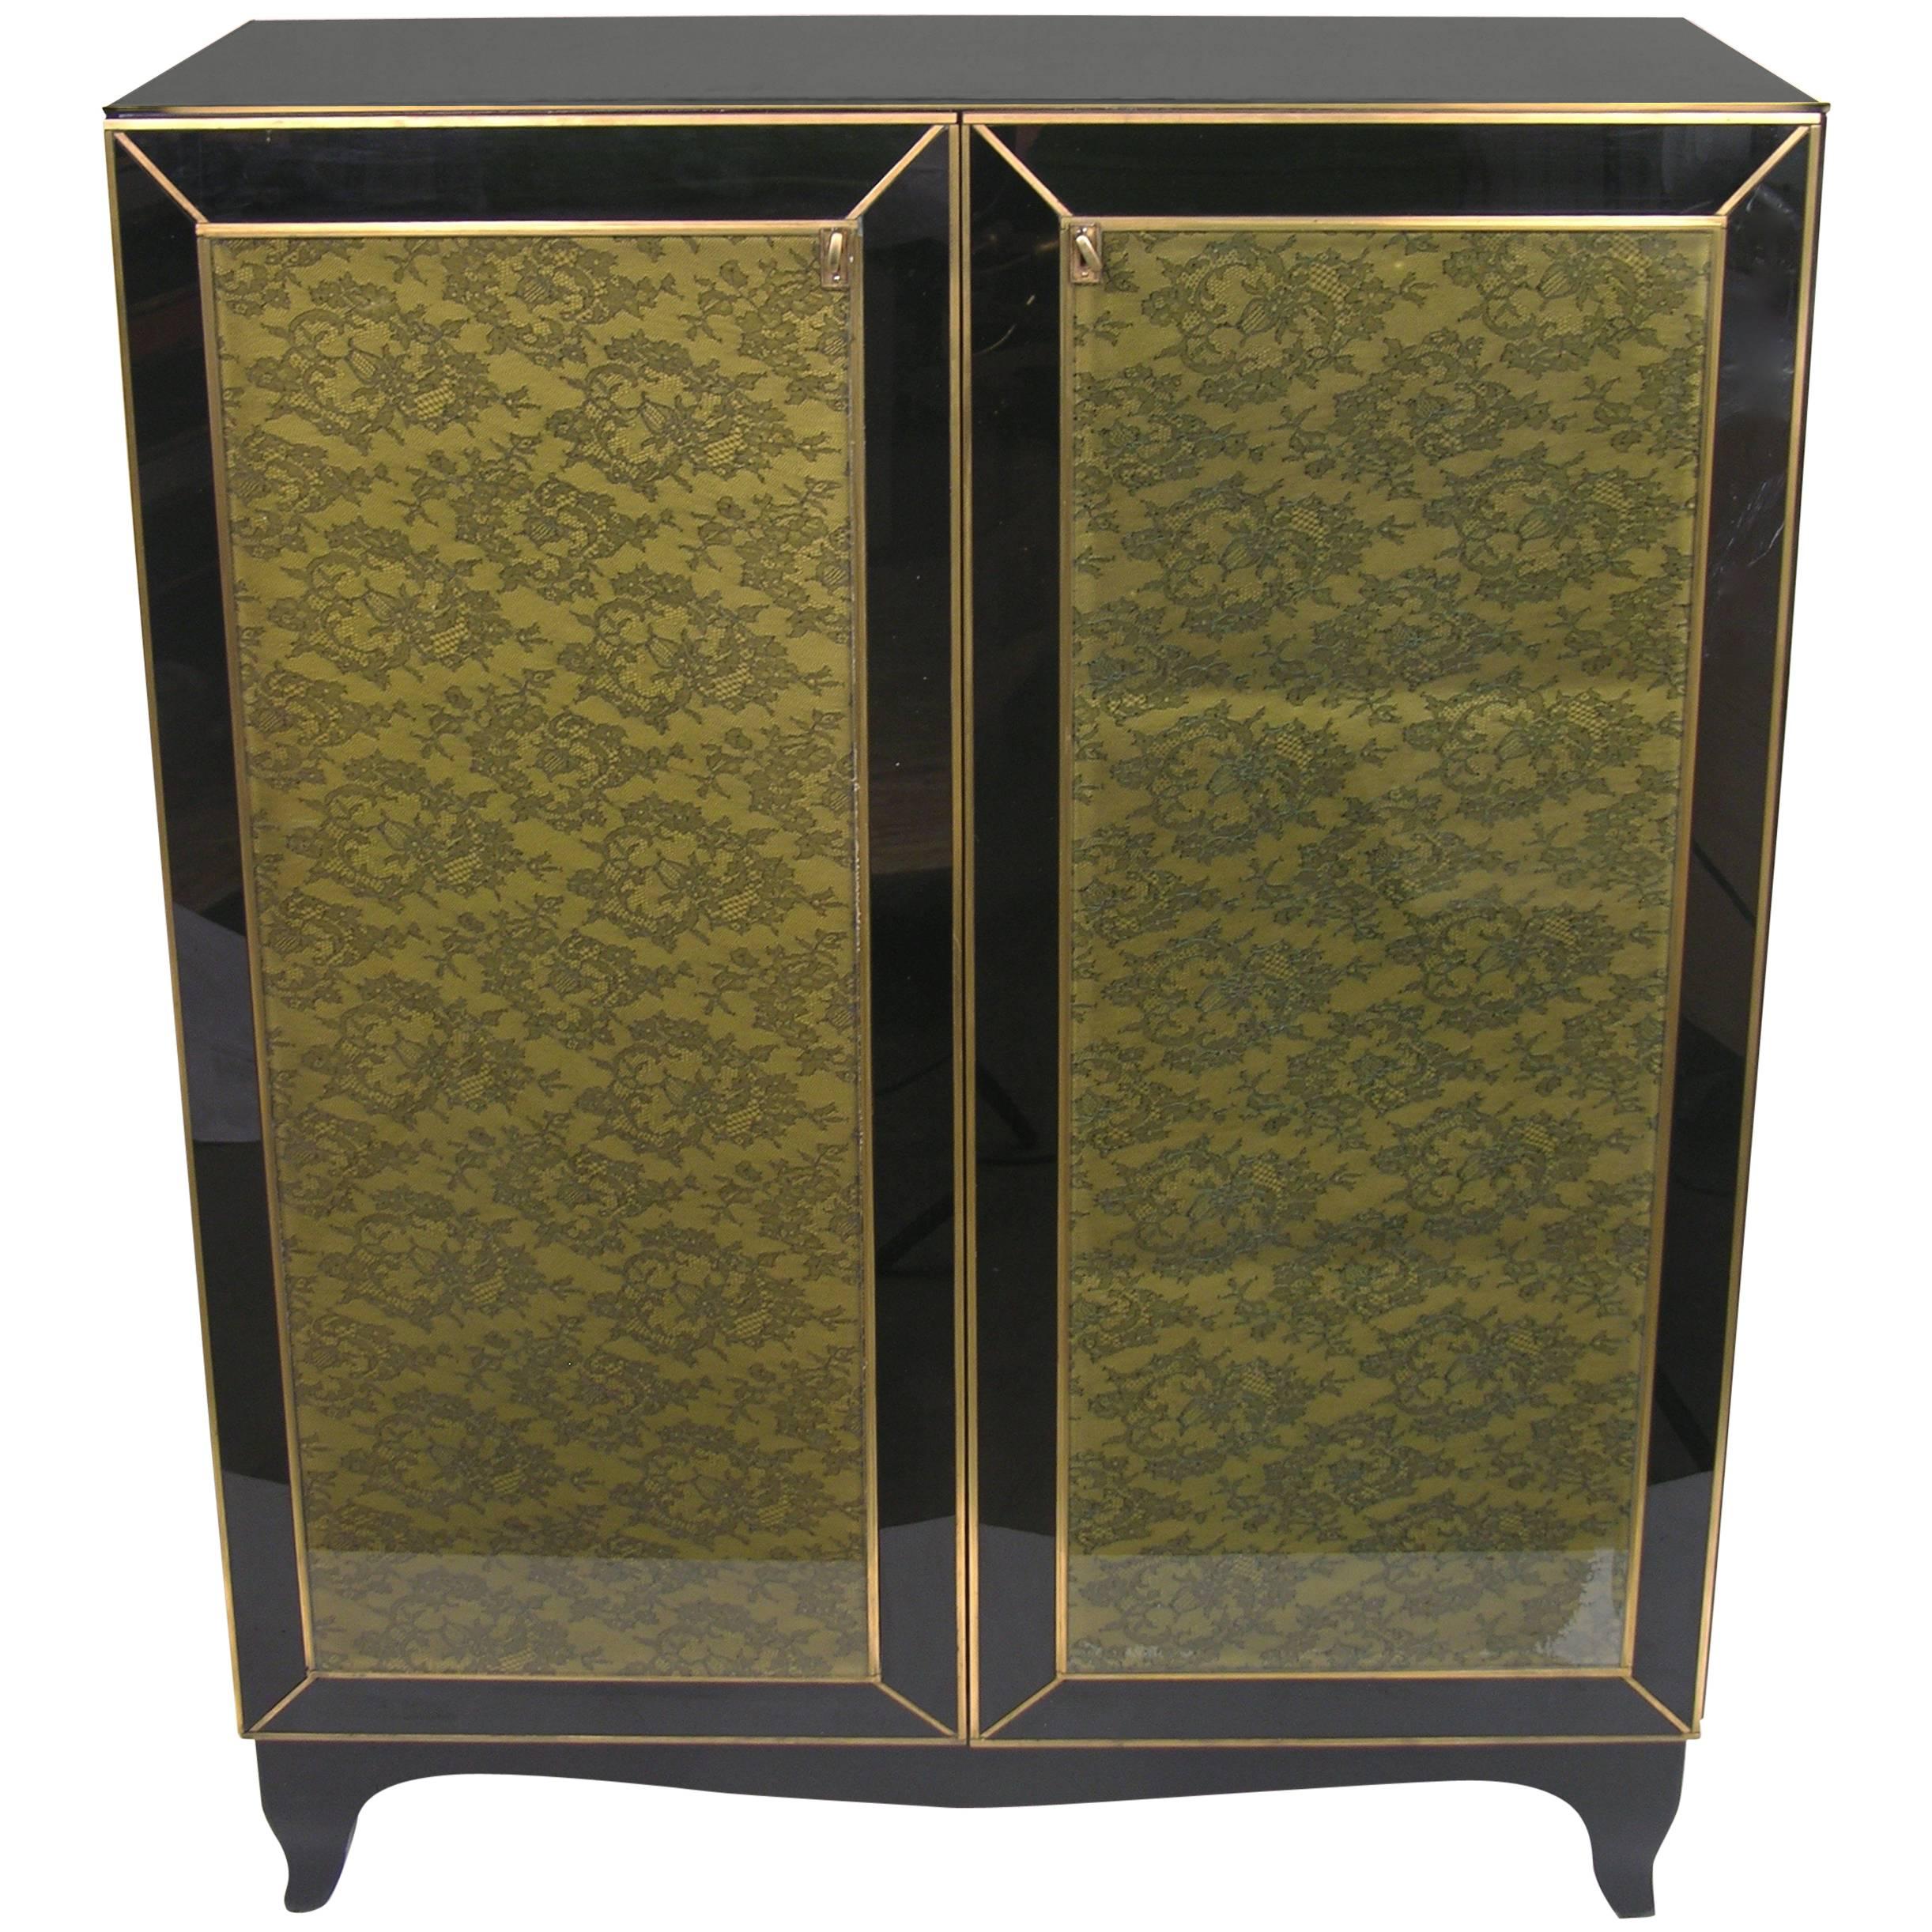 1970s One-of-a-Kind Italian Brass & Black Glass Cabinet with Green Lace Inlays